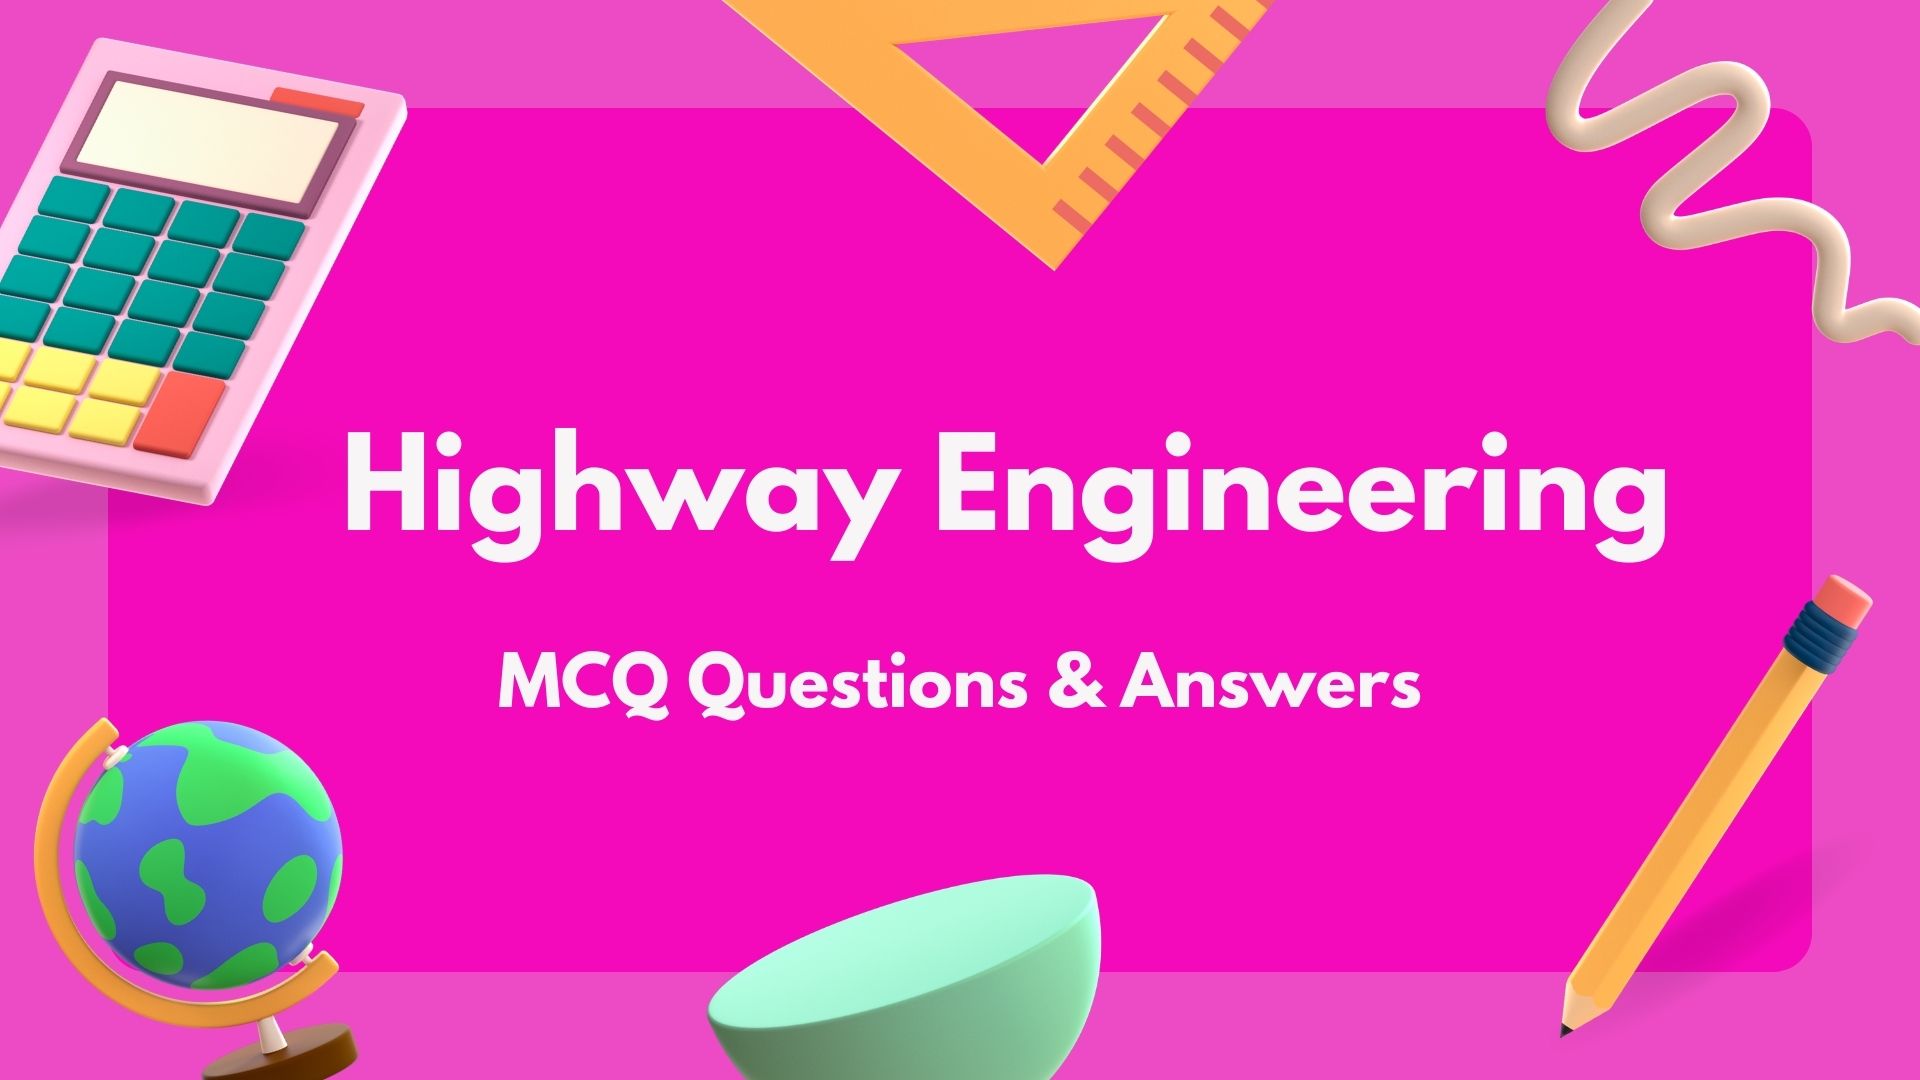 Highway Engineering MCQ Questions & Answers